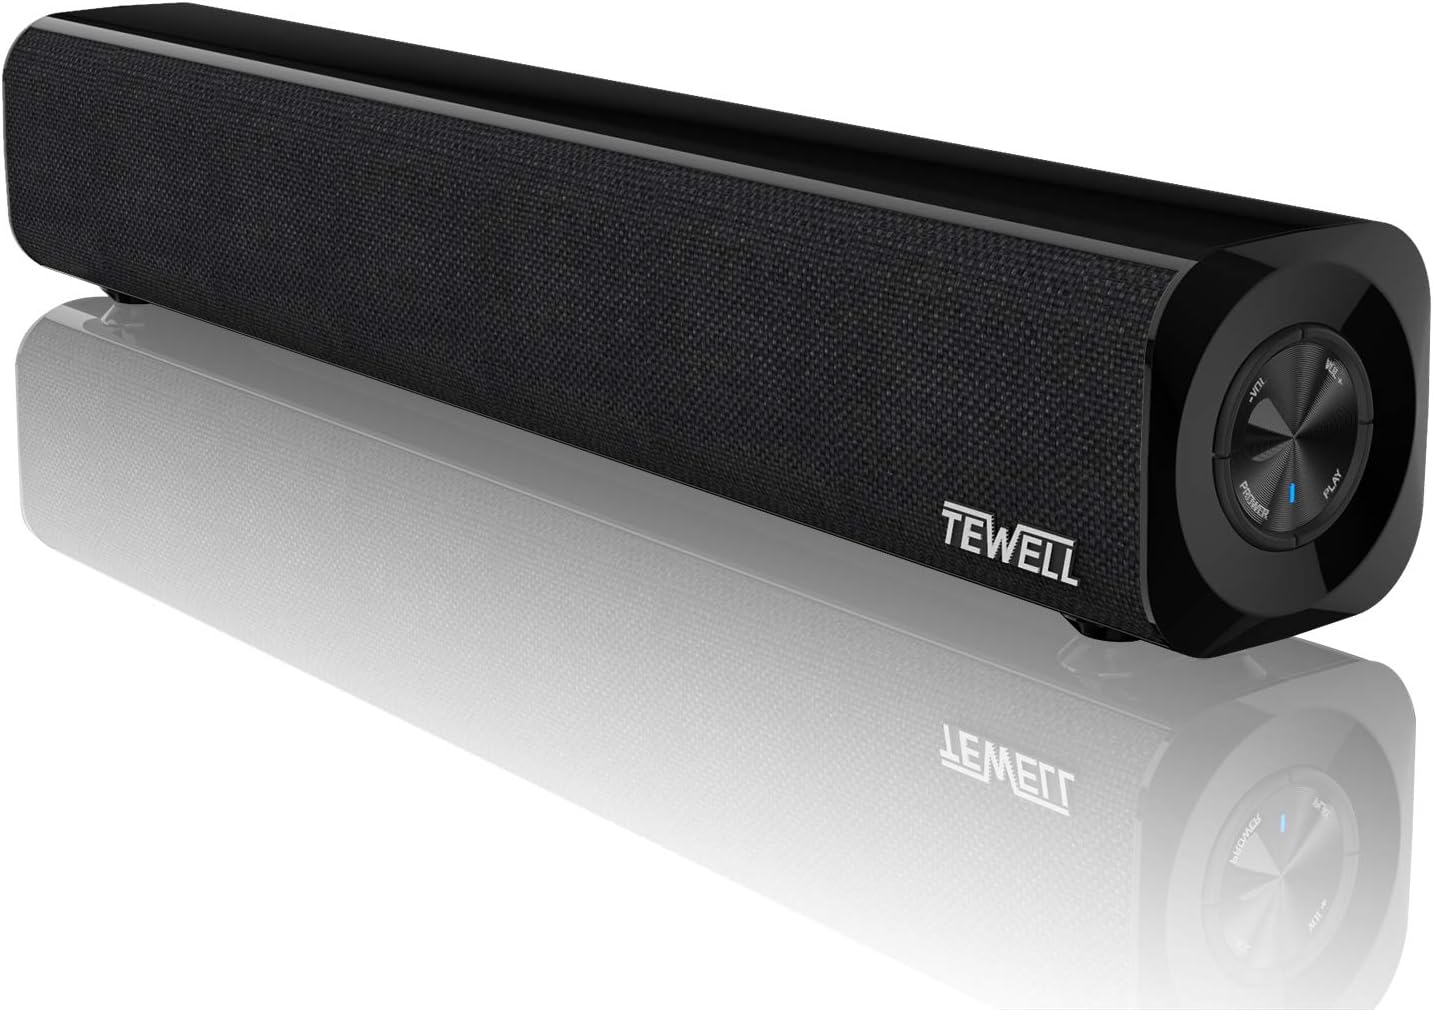 TEWELL Mini Sound Bar review